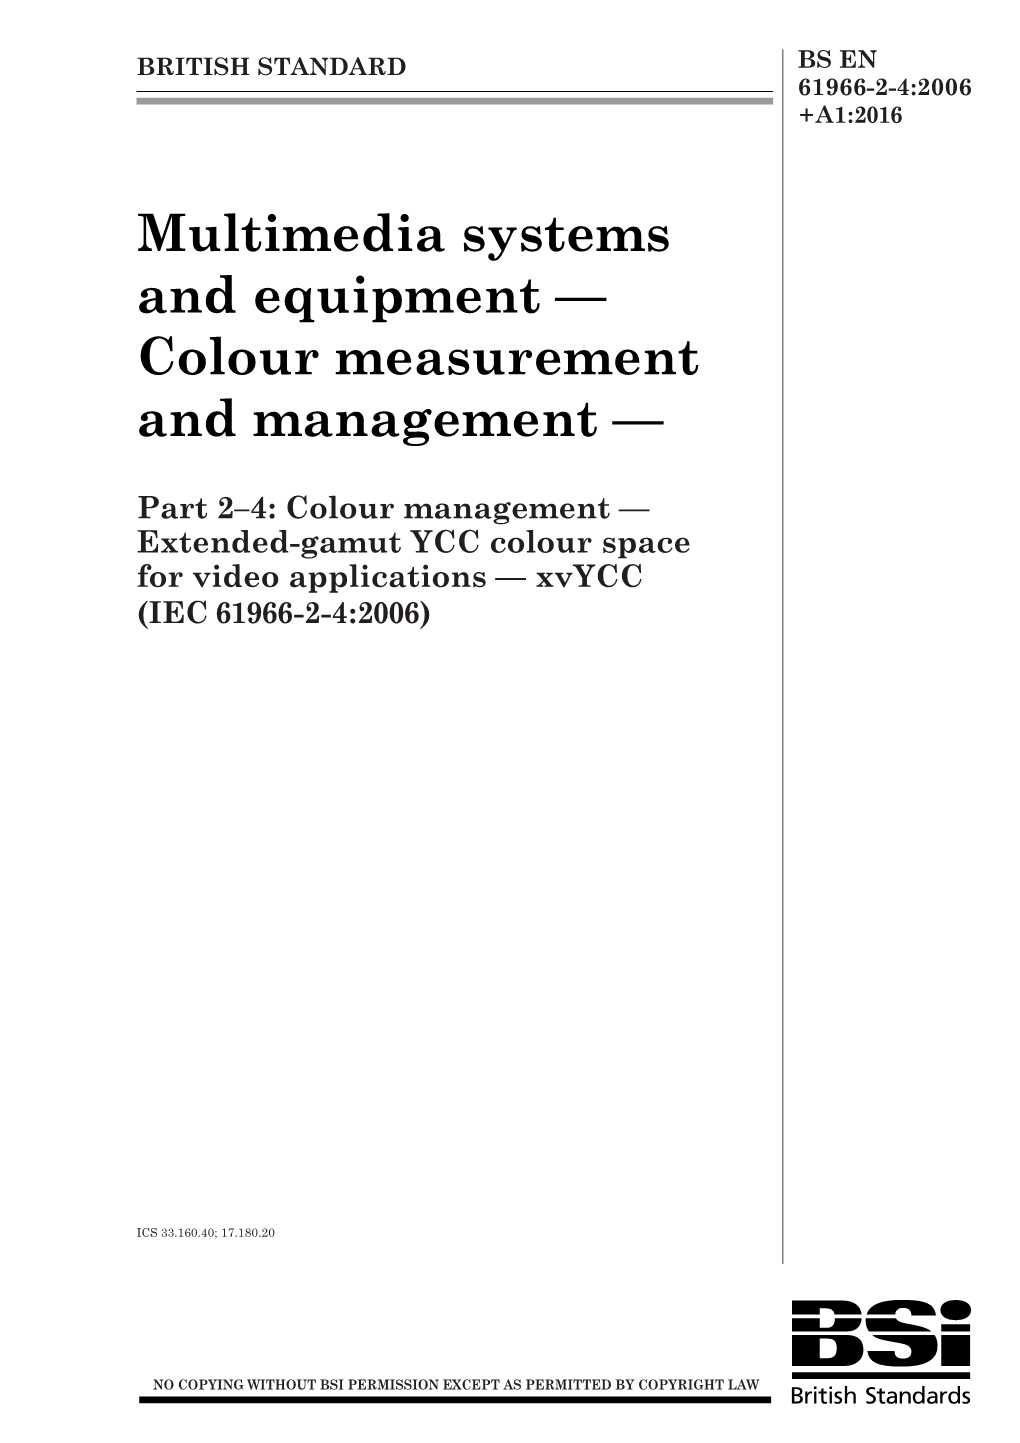 Multimedia Systems and Equipment — Colour Measurement and Management —